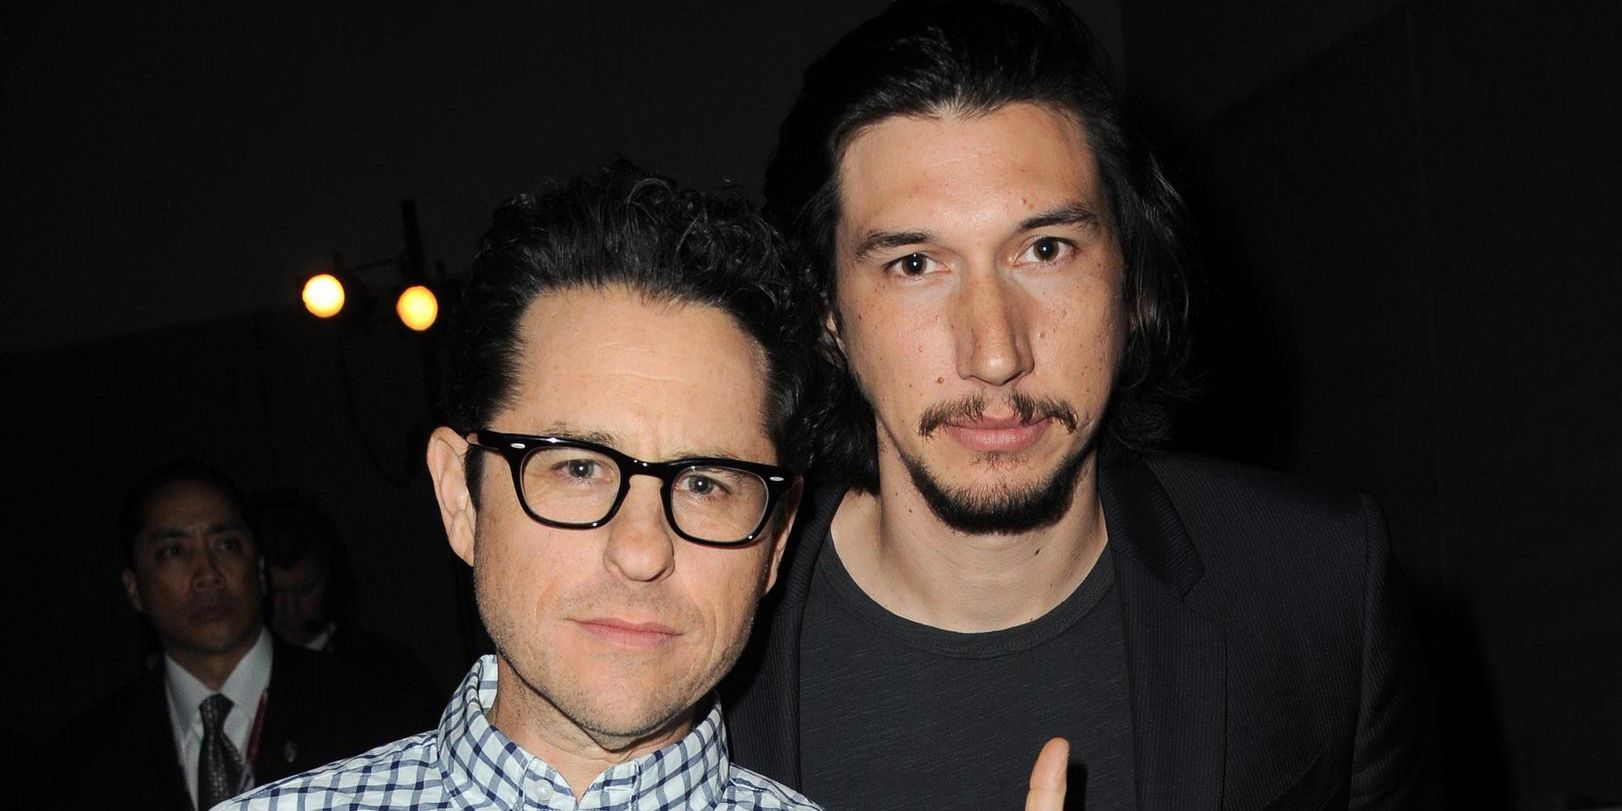 -j-abrams-and-adam-driver-at-an-event-for-star-wars-episode-vii-the-force-awakens-2015